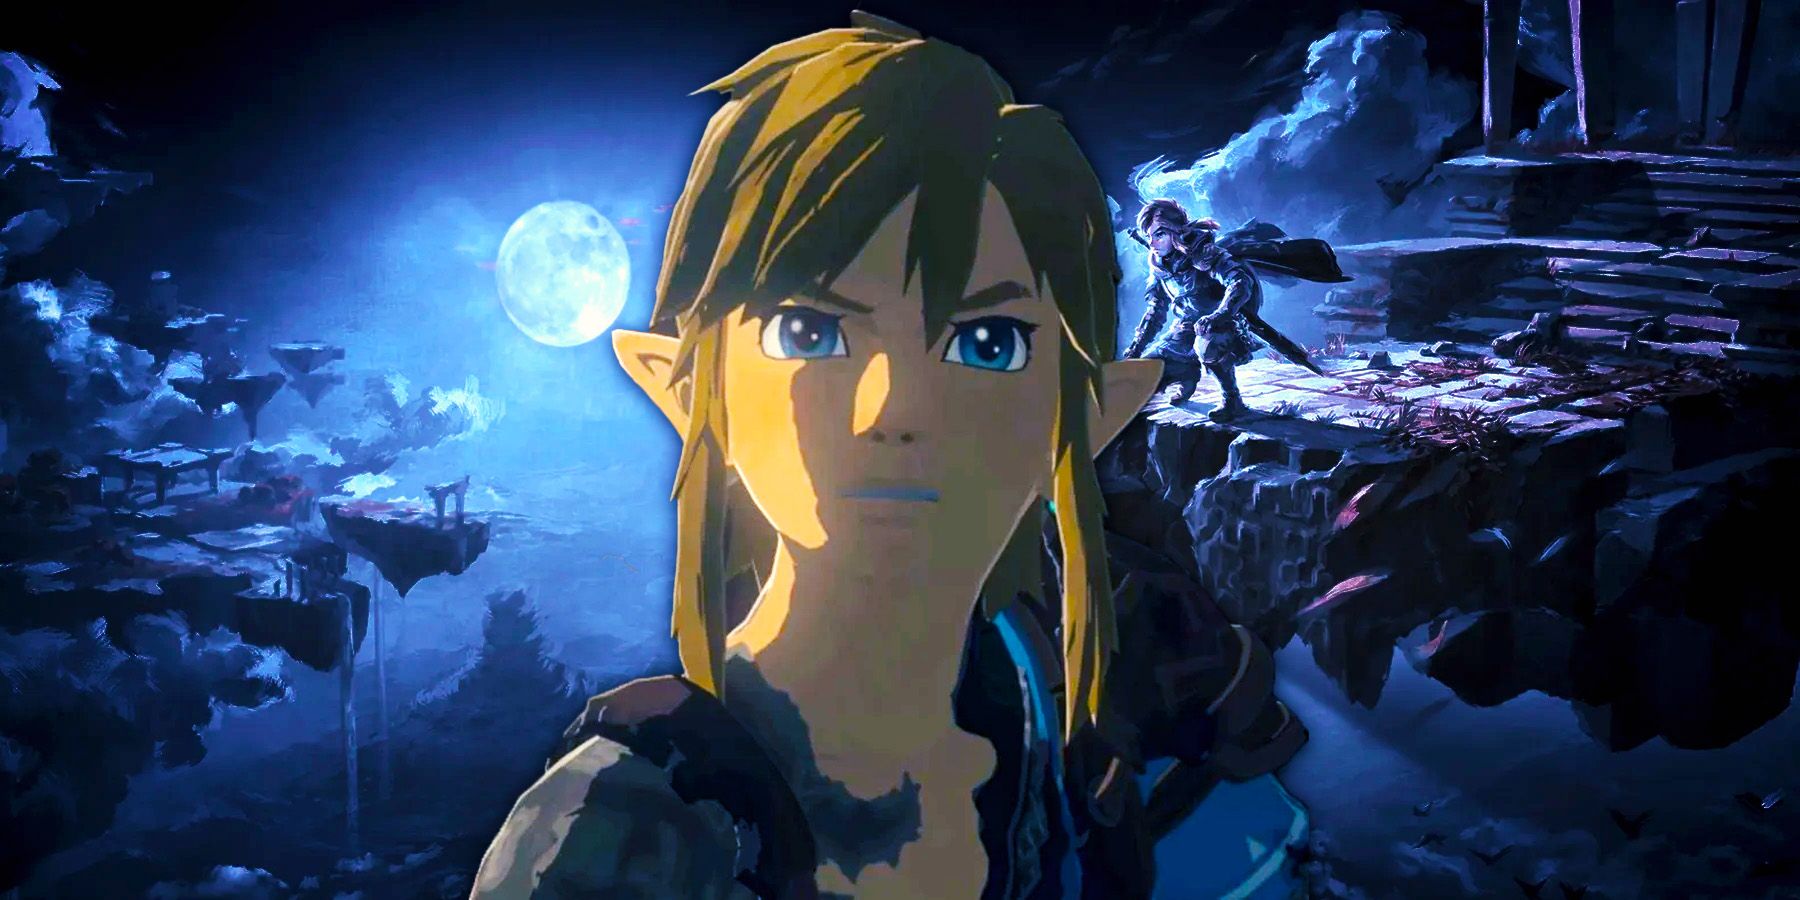 The Legend of Zelda's Link looking shocked with the night sky in the background.